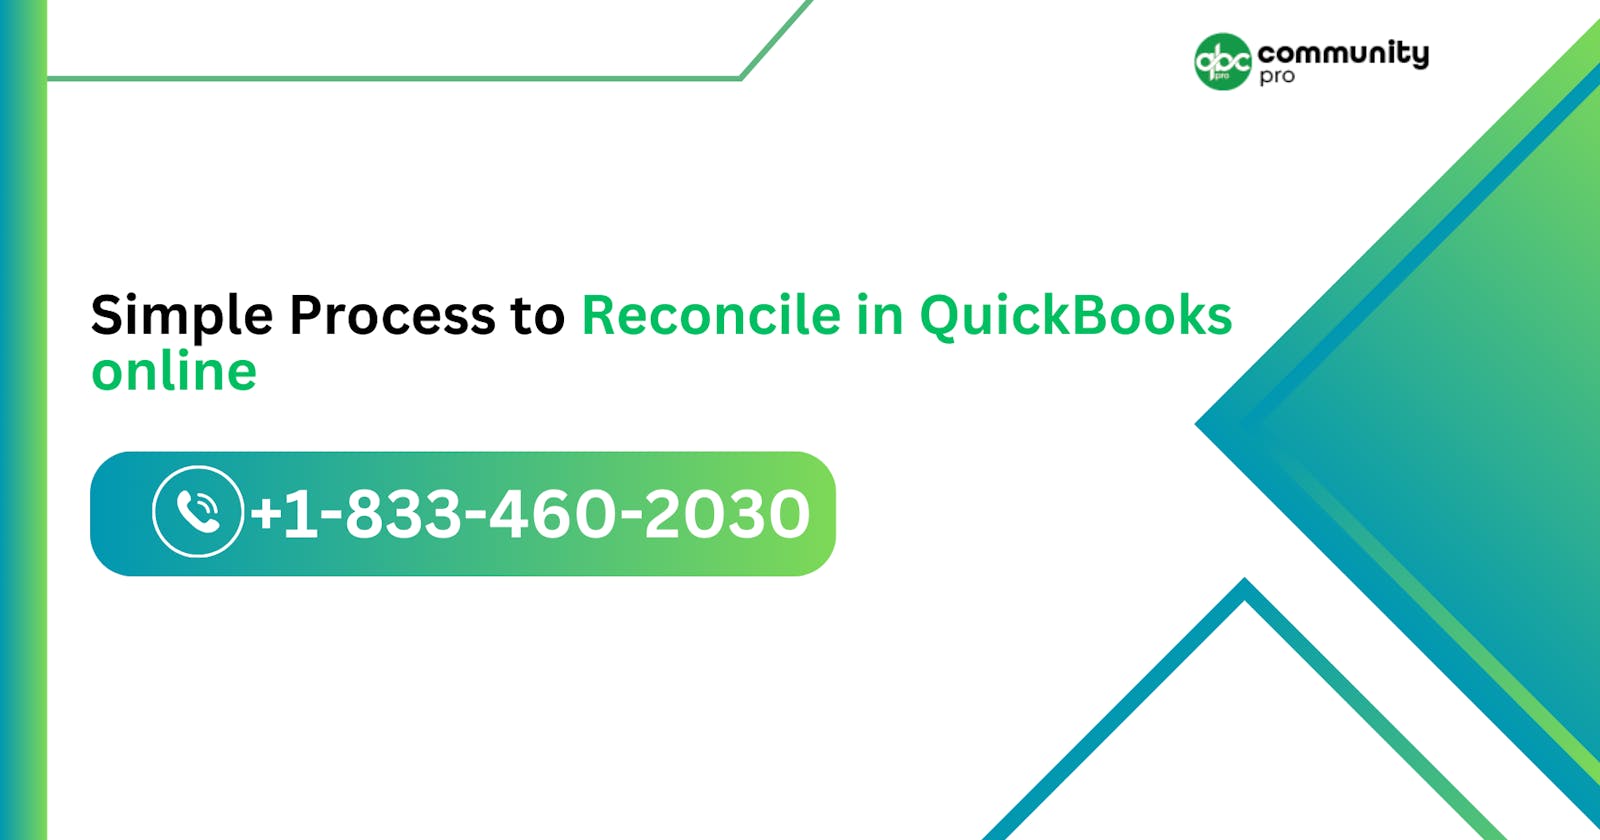 Simple Process to Reconcile in QuickBooks online